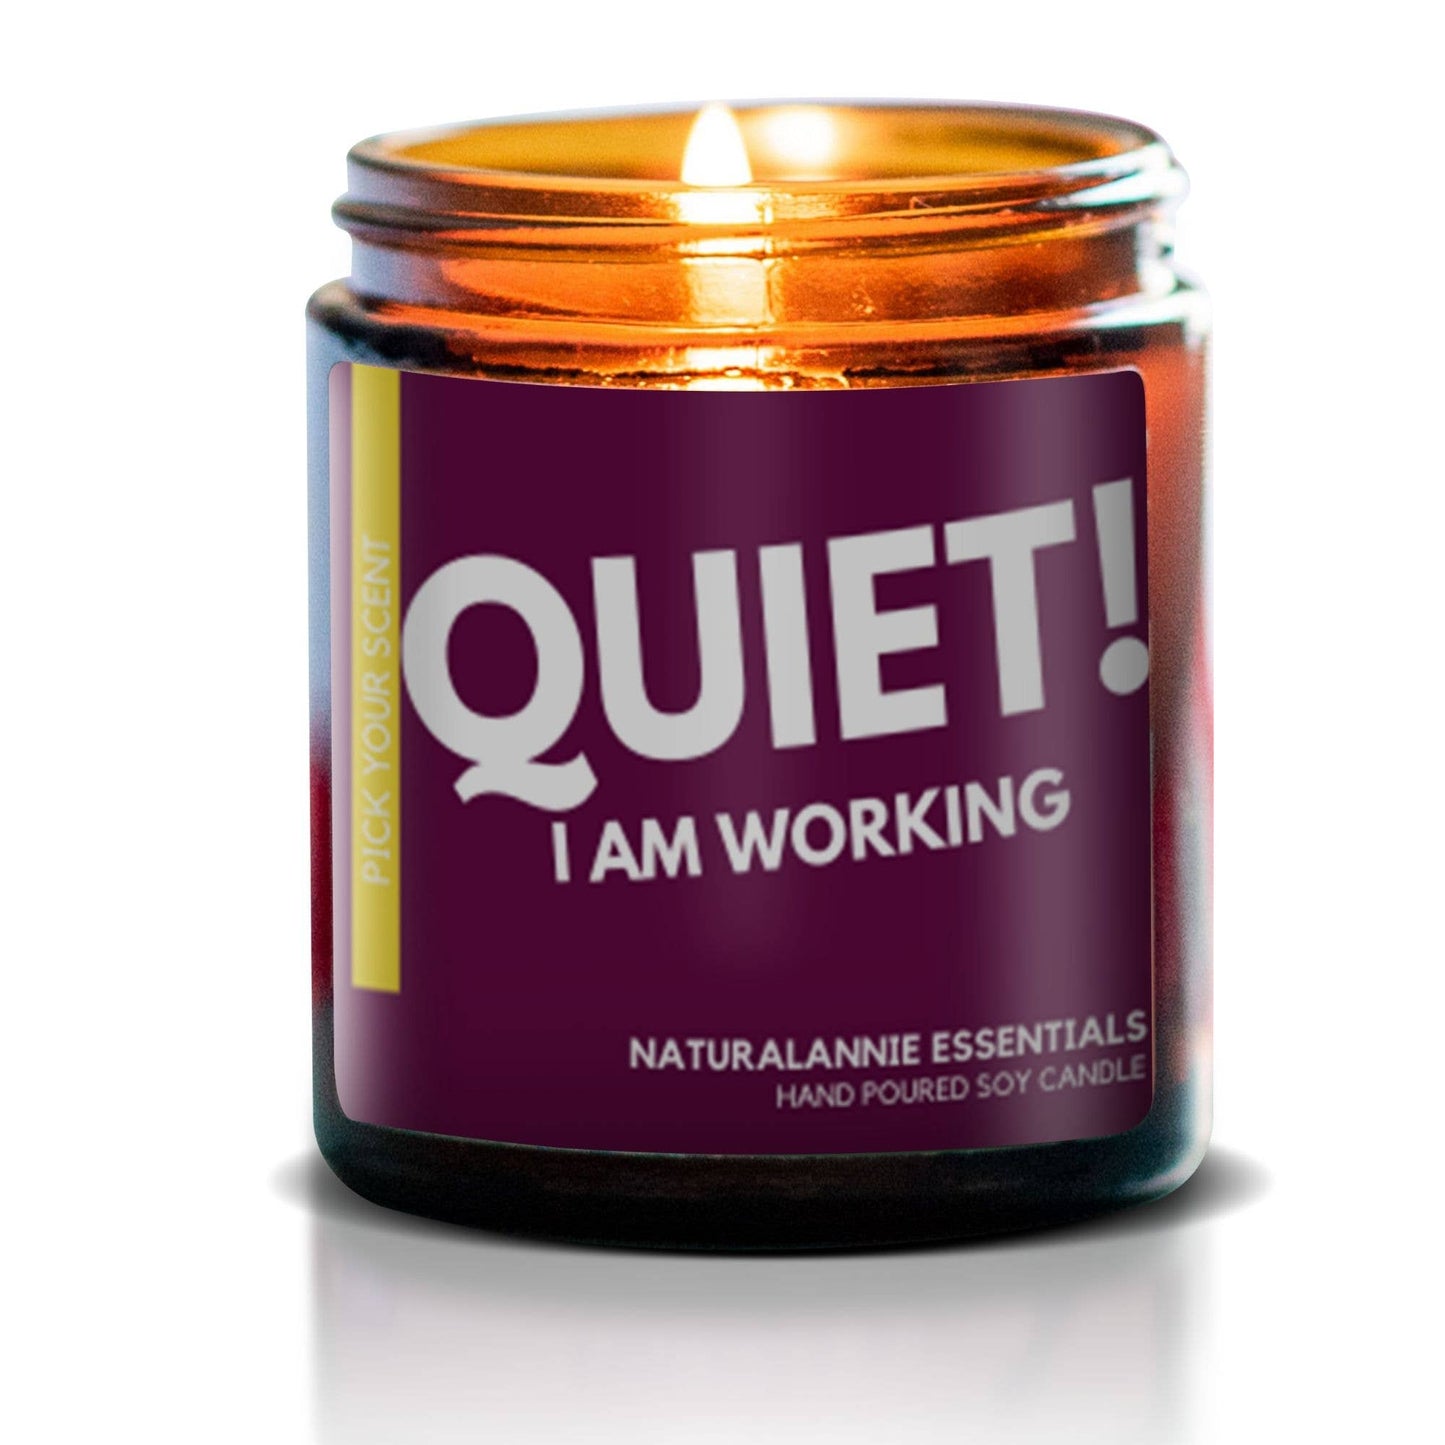 Quiet! I am Working Hand-poured 4oz soy candle by Natural Annie Essentials